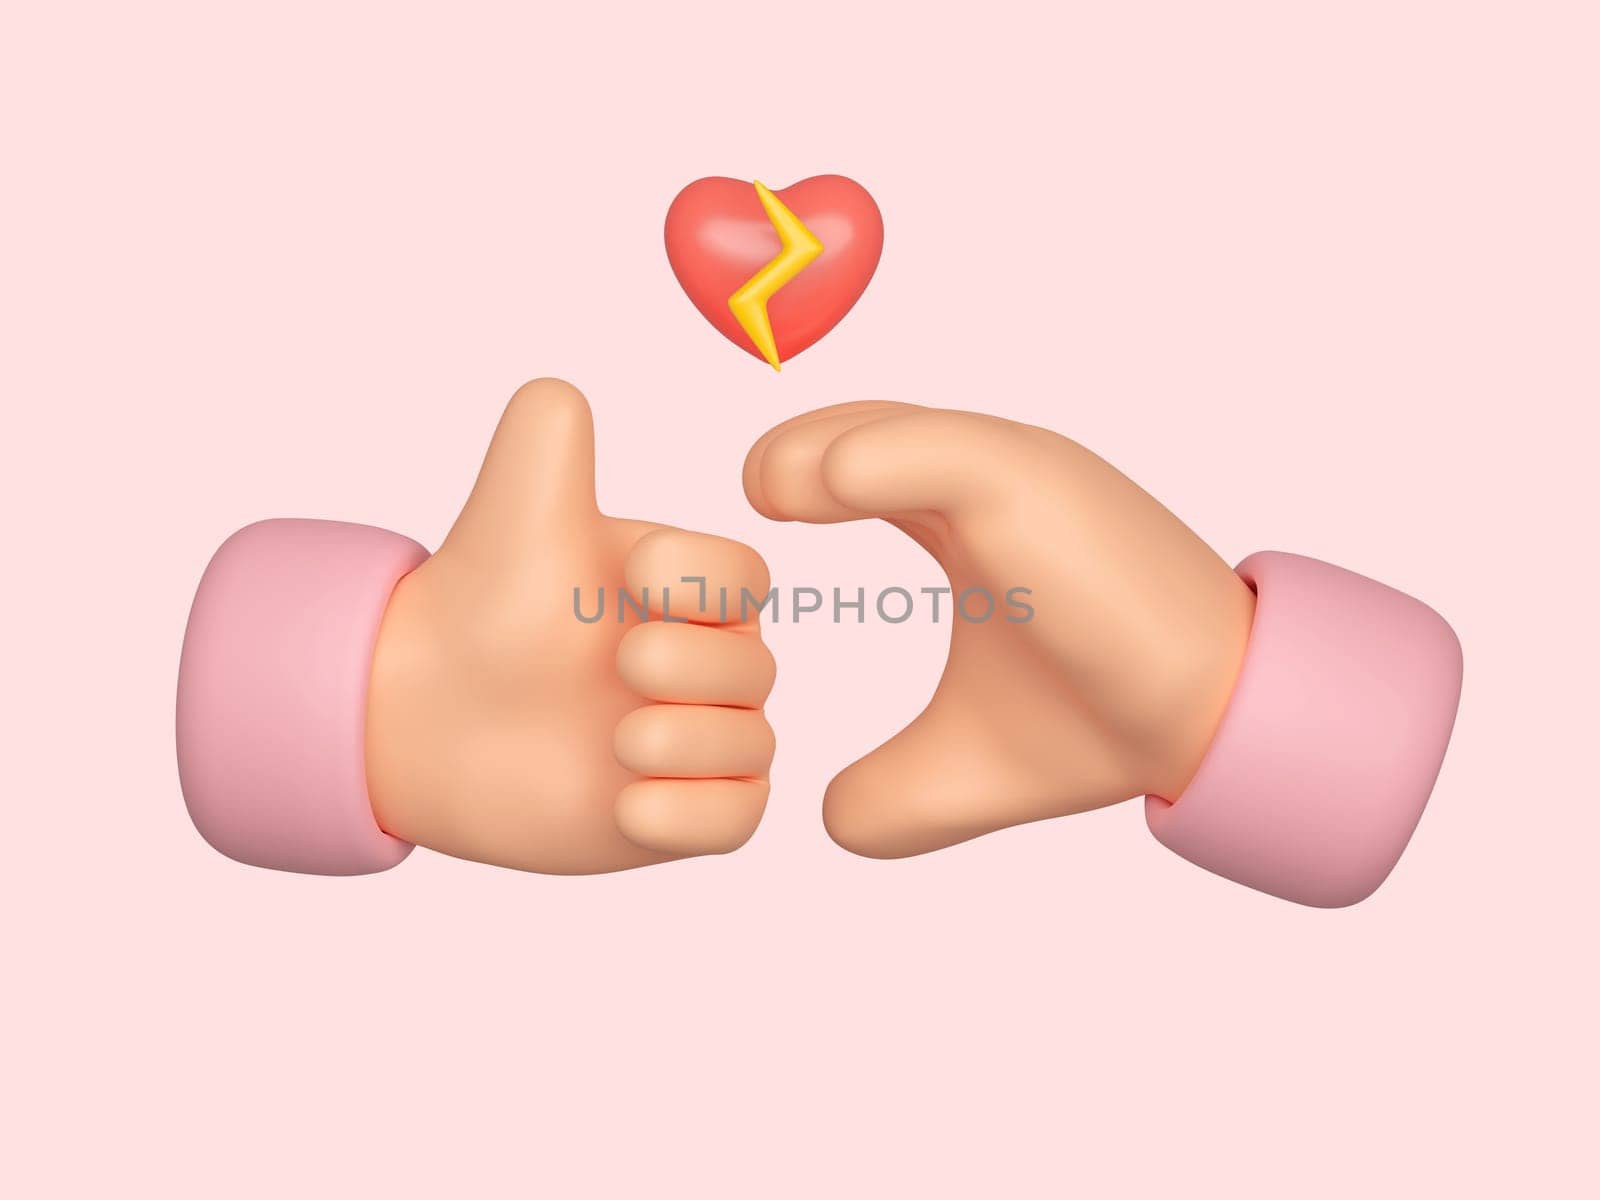 3d Cartoon hand with broken heart isolated on pink background with clipping path. 3d render illustration by meepiangraphic